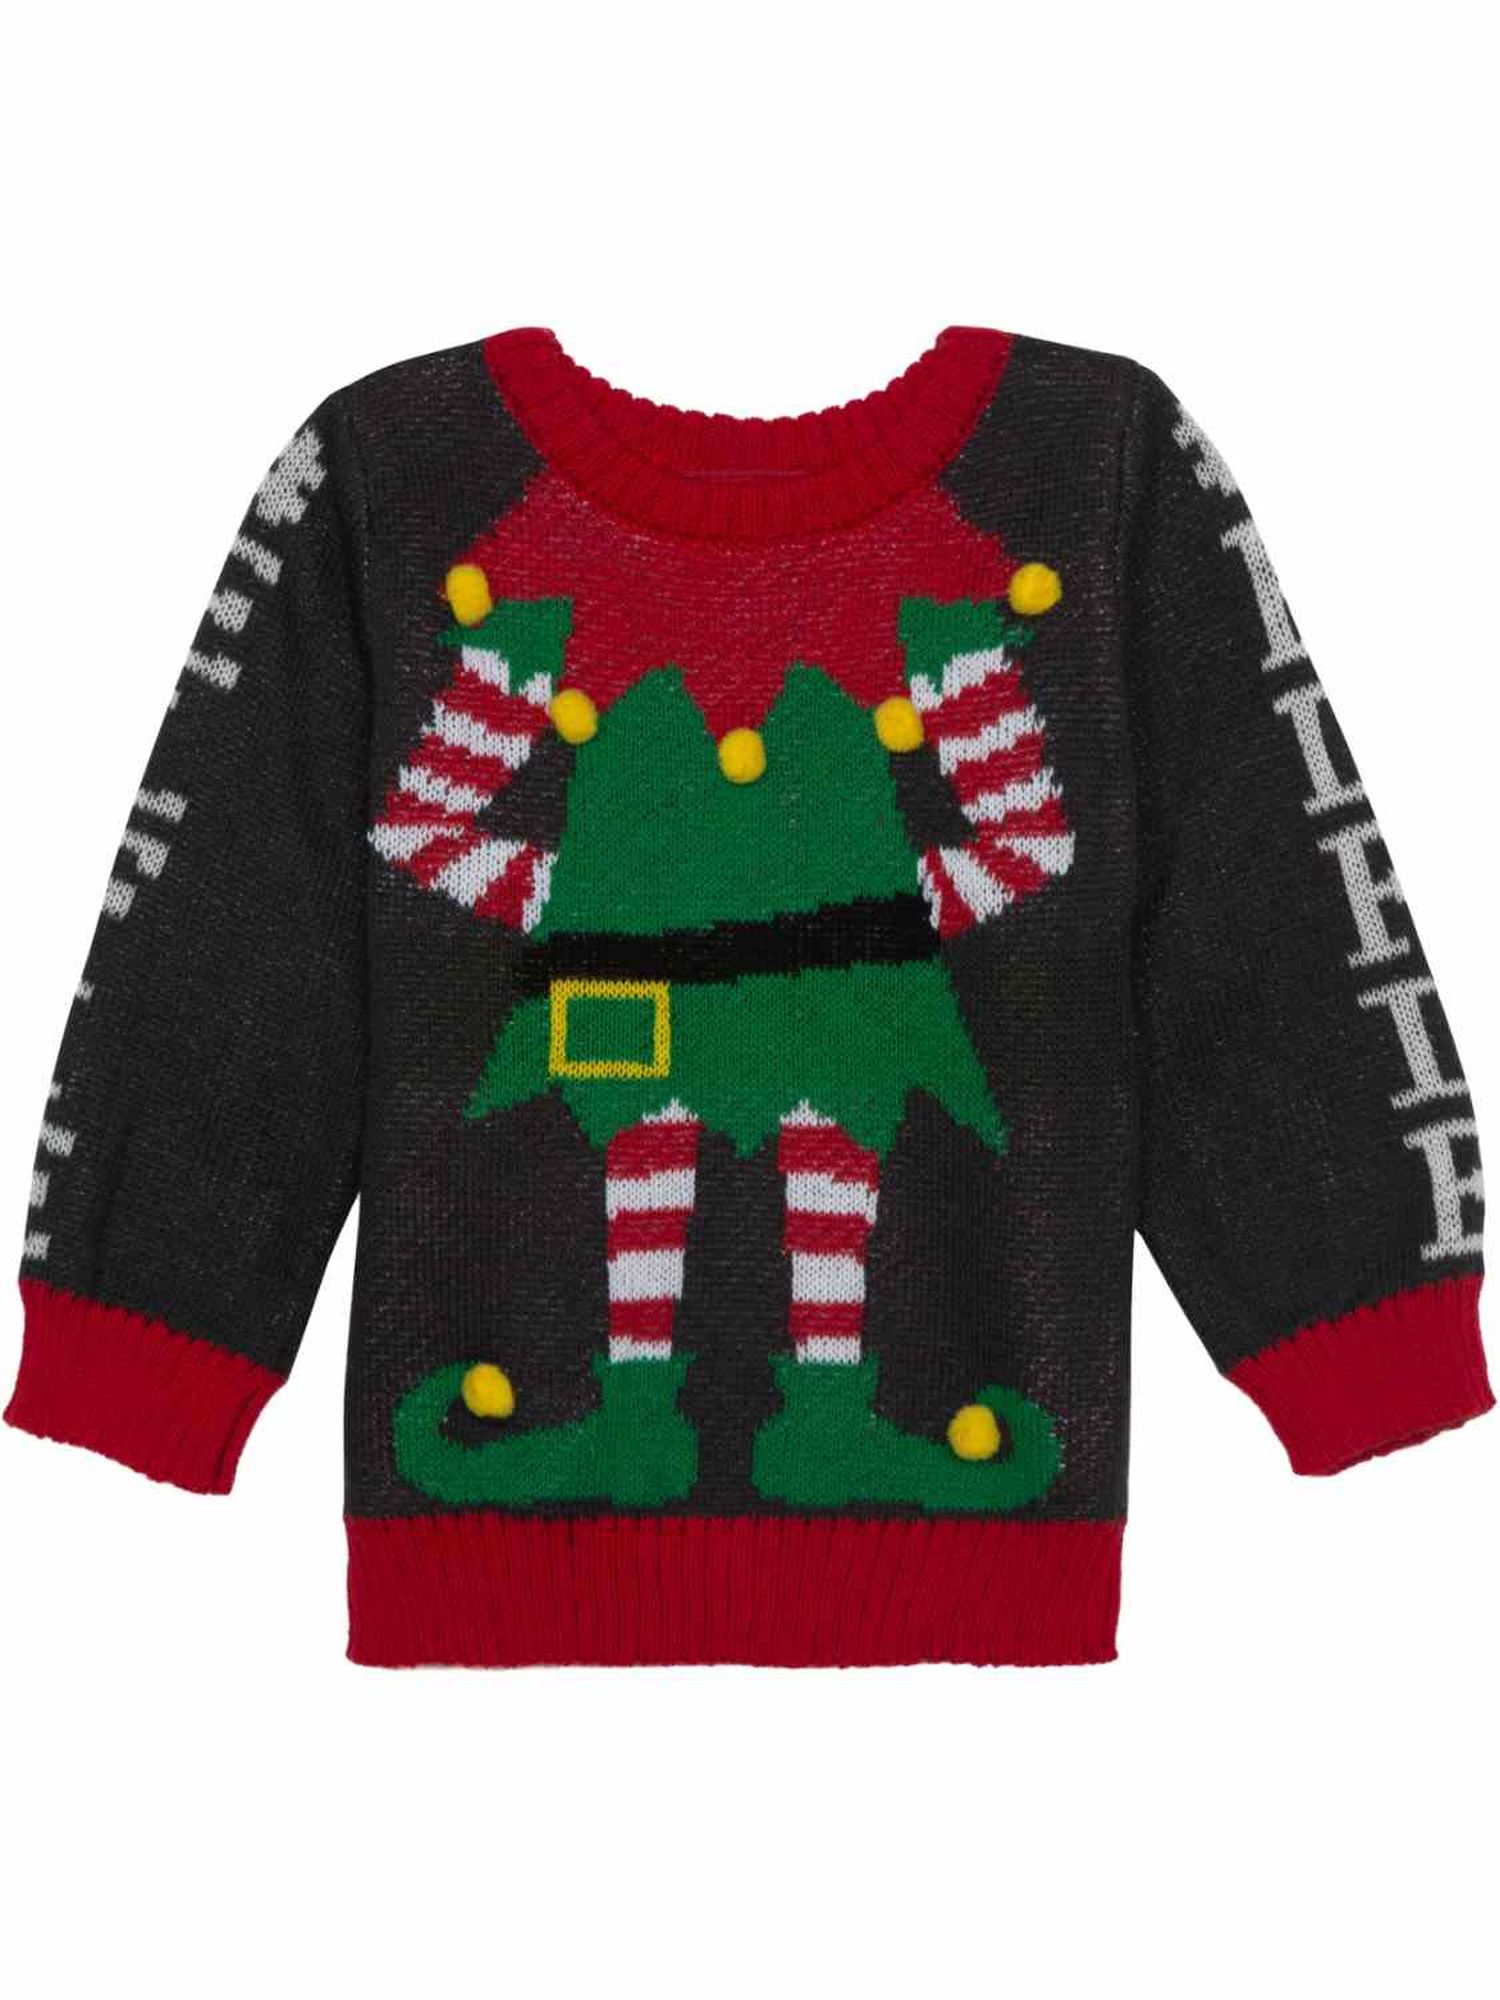 Retro New Camp Ltd Girls Kids Boys Children Unisex Christmas Xmas Knitted Novelty Football Jumper Sweater Christmas Xmas 2019 Exclusively to for Ages 2-14 Years Elf